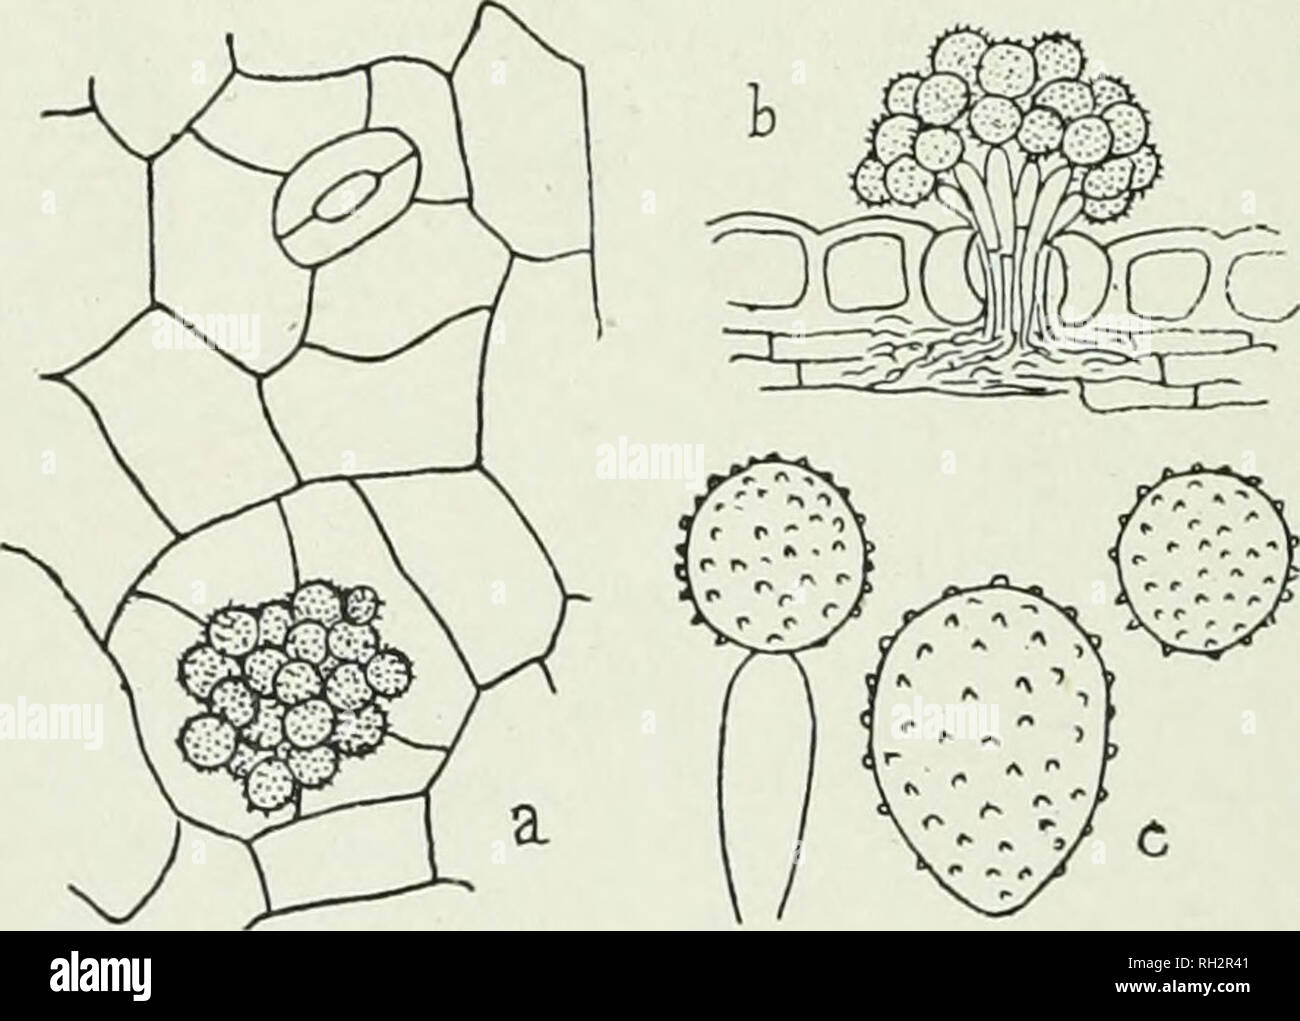 . The British rust fungi (Uredinales), their biology and classification. Uredineae. 382 HEMILEIA On leaves of Gattleya Dowiana Batem., imported from Costa Rica, 1899. (Fig. 285.) Only a small patch of Rust was present on the leaf when the plant was received from Costa Rica, but this continued to increase in size and the falling spores infected other leaves. The ui-edospores germinated readily, and young Gattleya leaves, inoculated on the under surface, produced mature uredospores in thirteen days. No success attended the efforts to infect other orchids, not belonging to the genus Gattleya. Thi Stock Photo